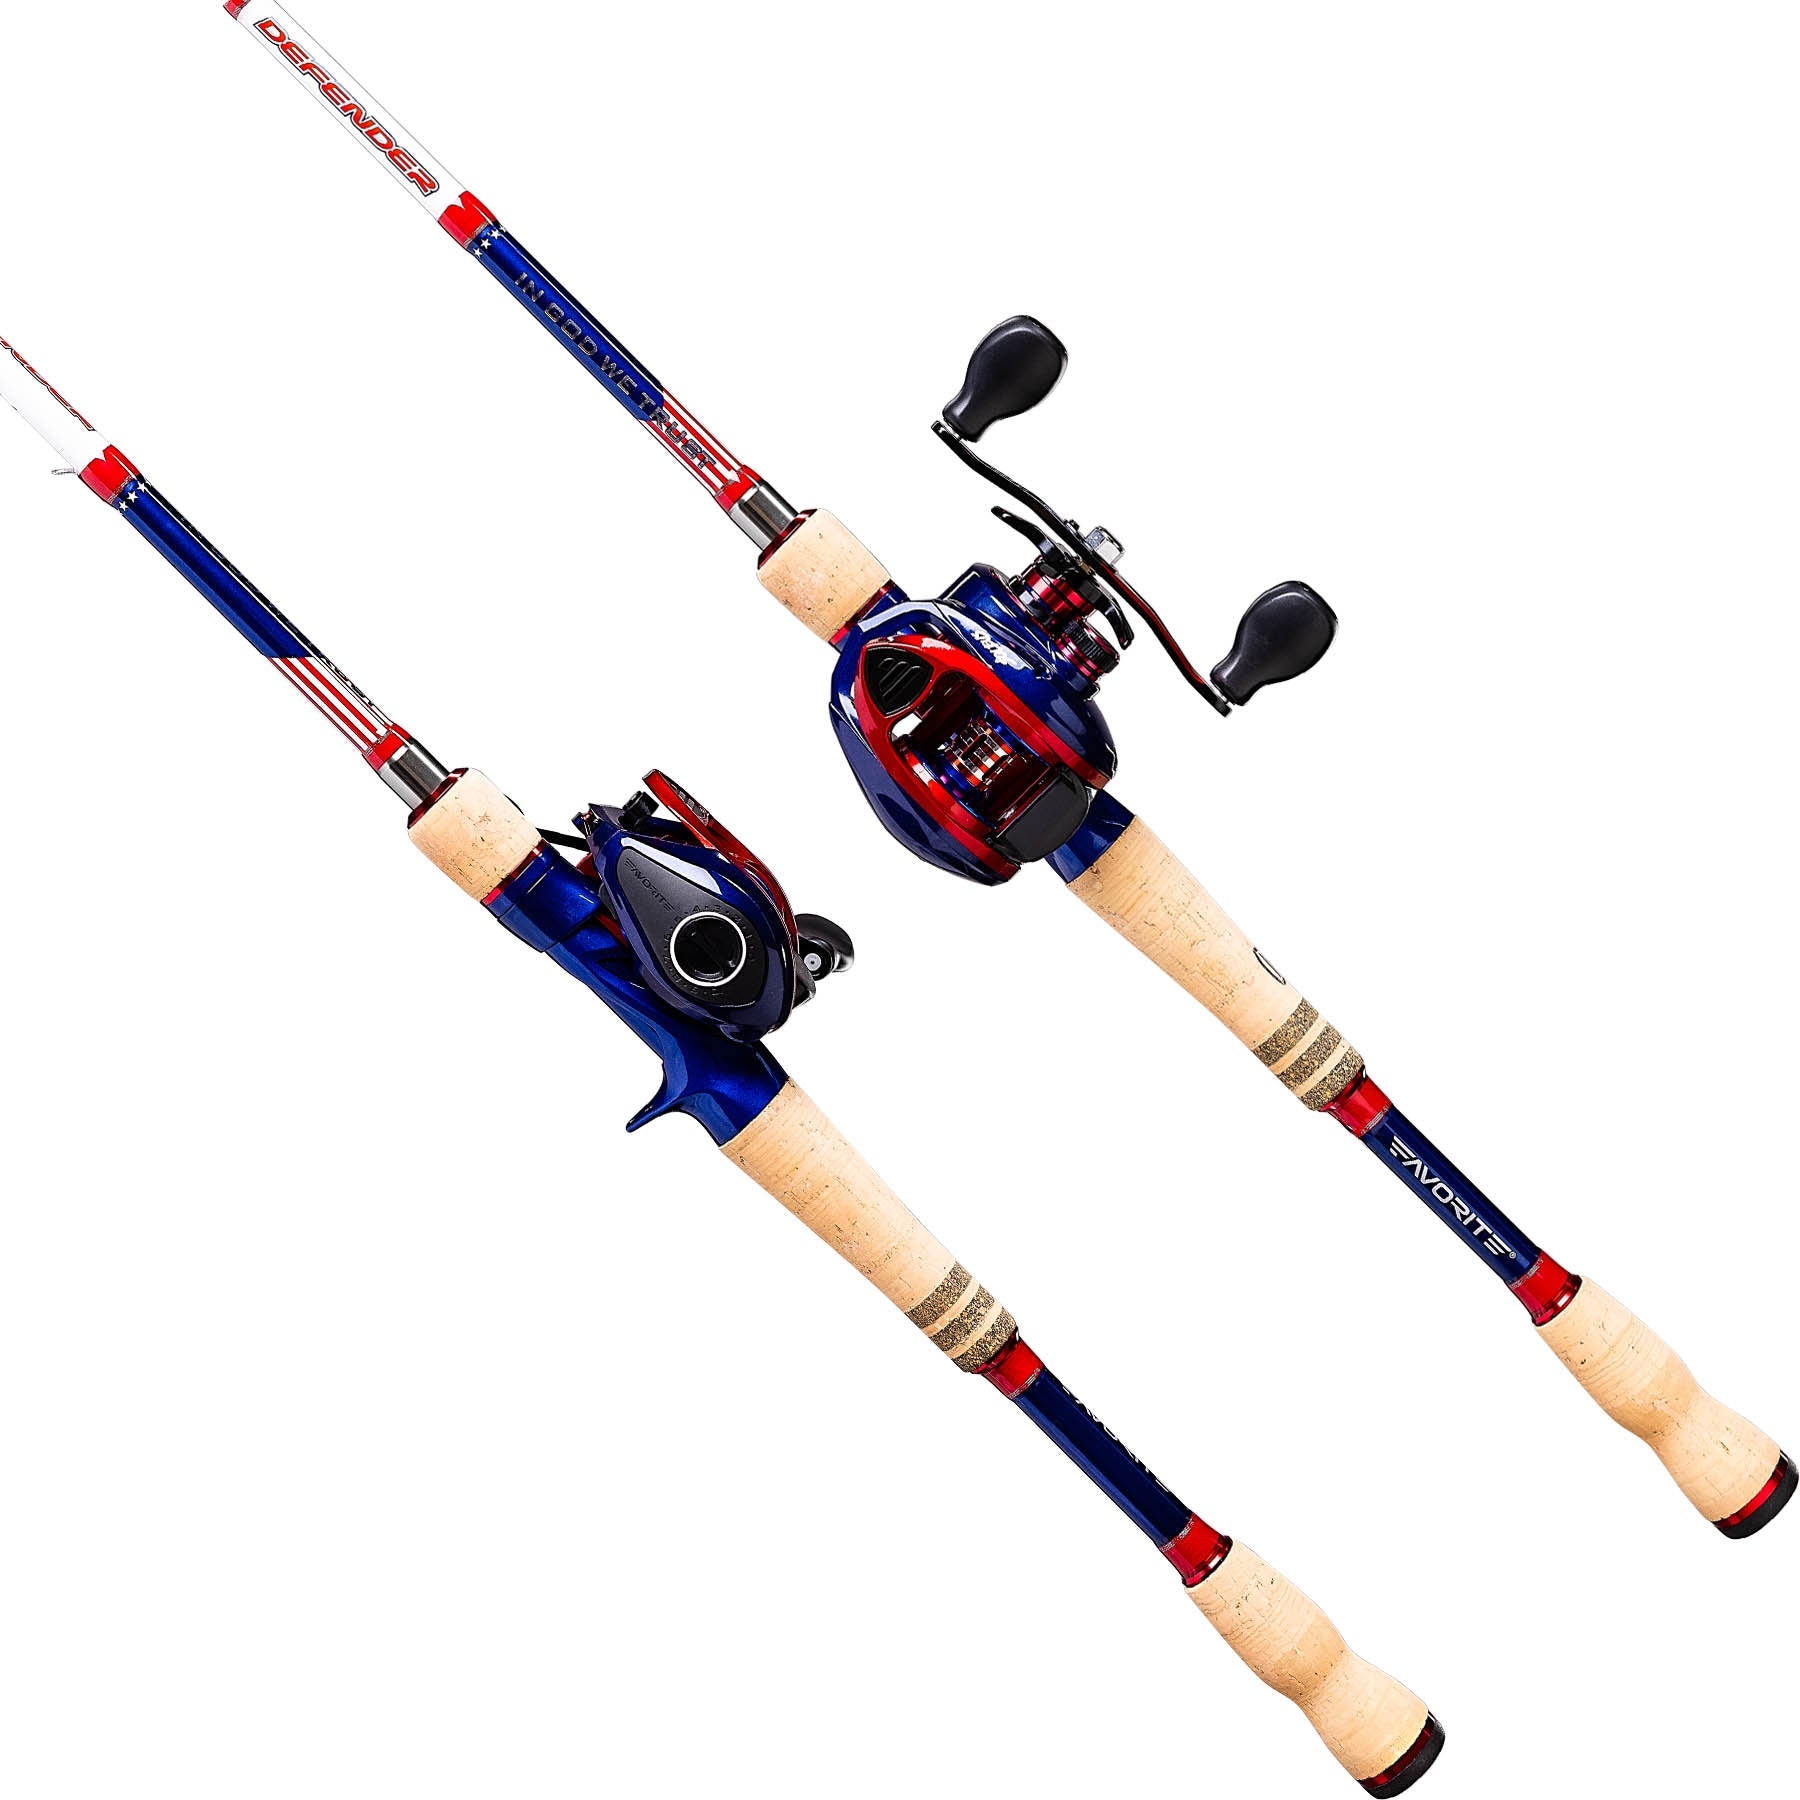 Is It Better To Buy Fishing Fishing Rod And Reels Separately Or Together As Fishing  Combos?